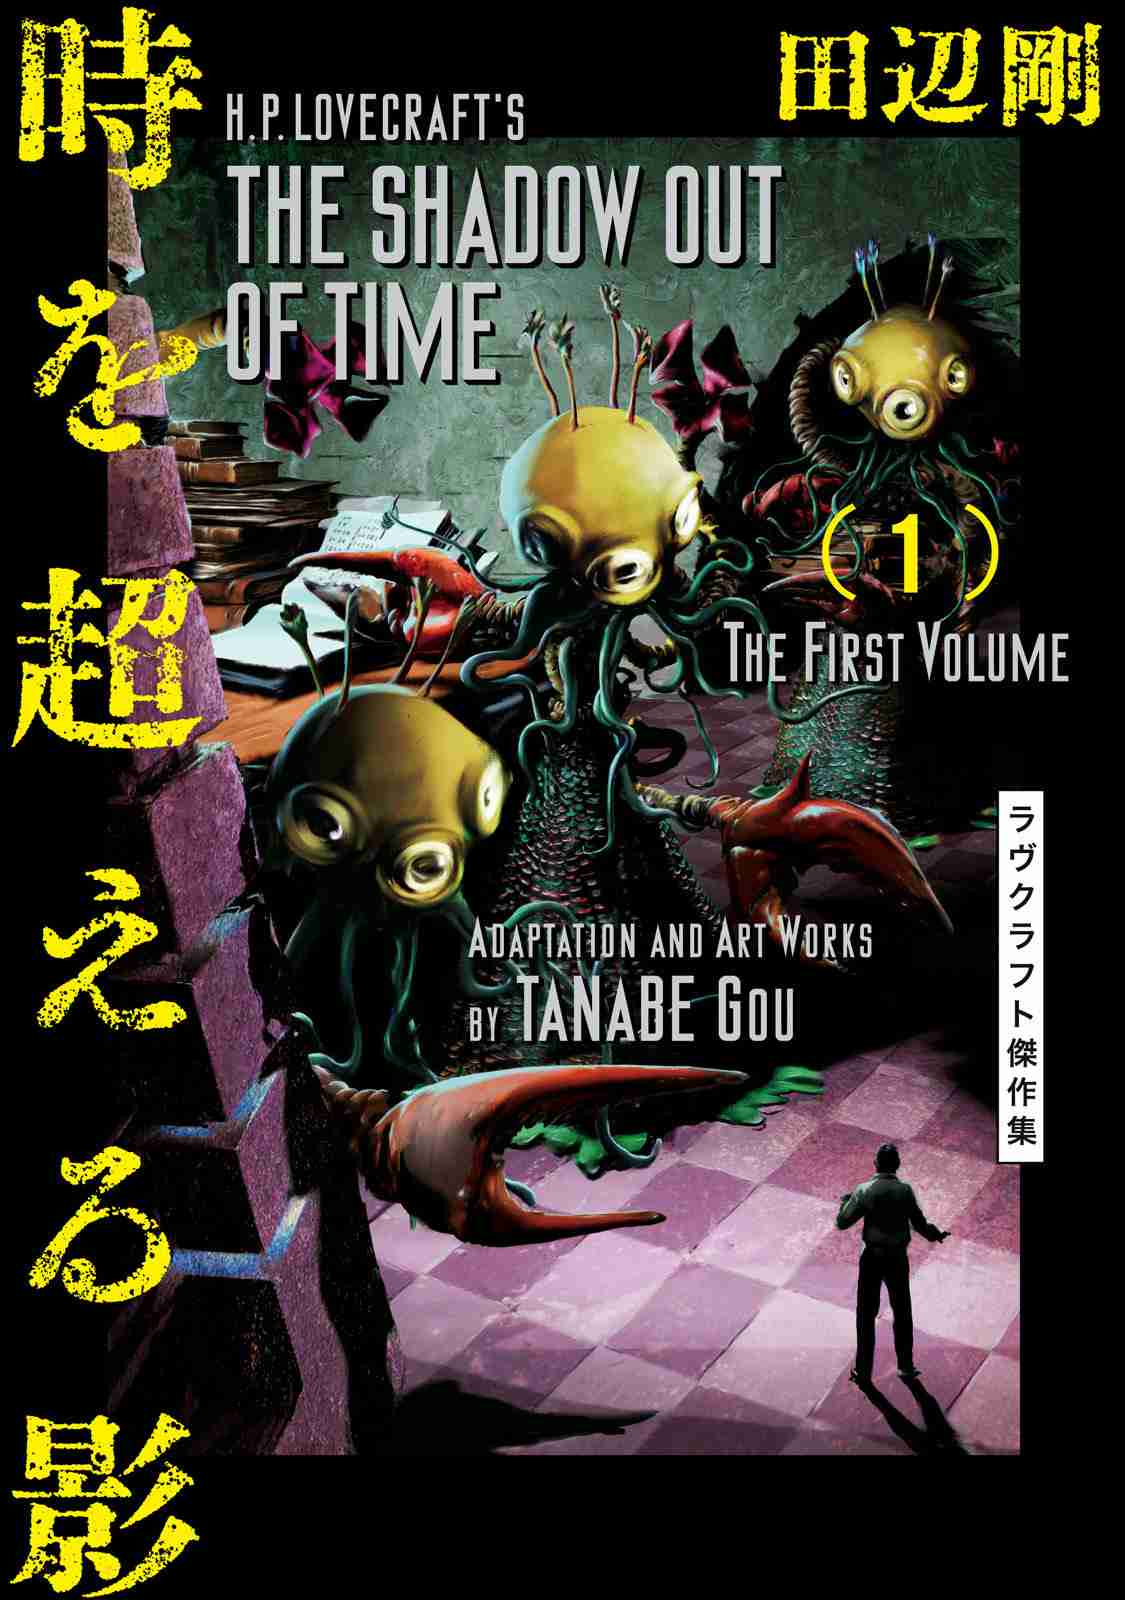 H.P. Lovecraft's The Shadow out of Time Vol. 1 Ch. 0 The Great Sandy Desert in Australia